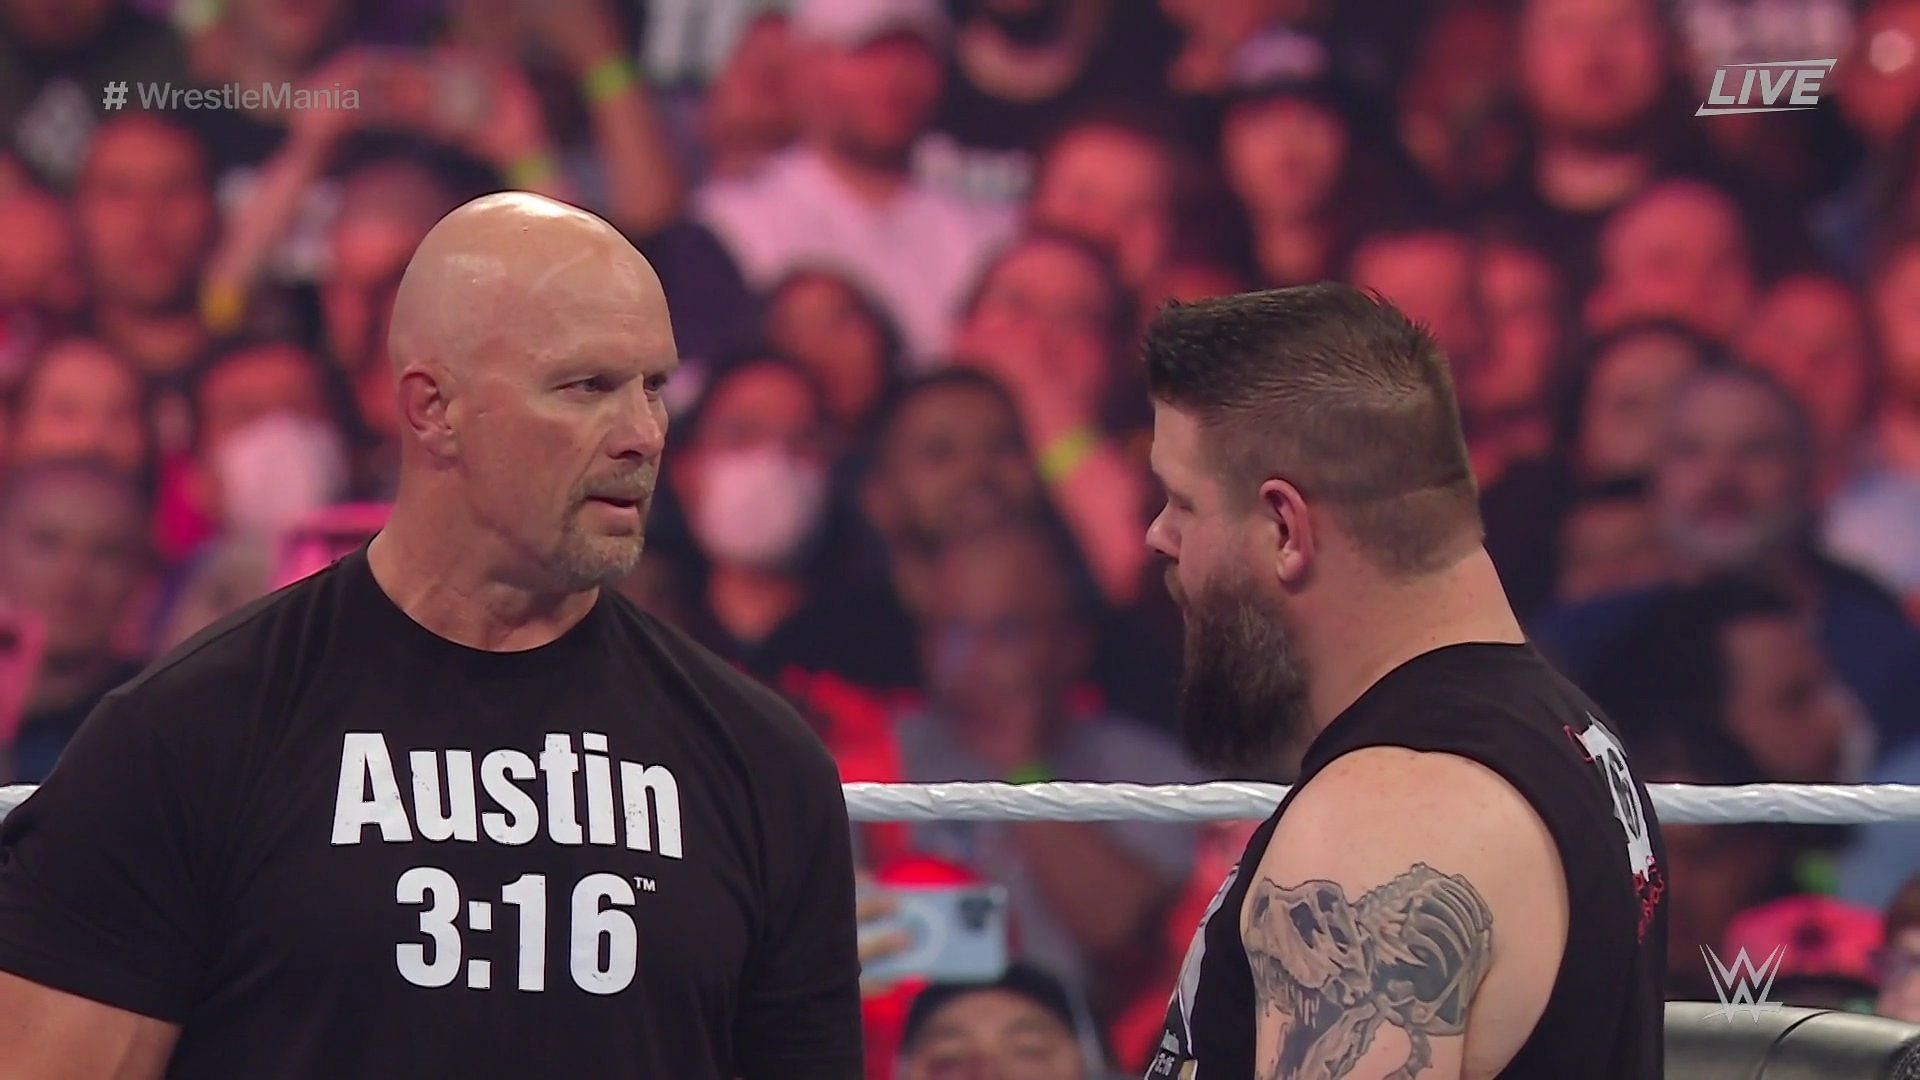 Stone Cold Steve Austin competed in the ring for the first time since WrestleMania 19